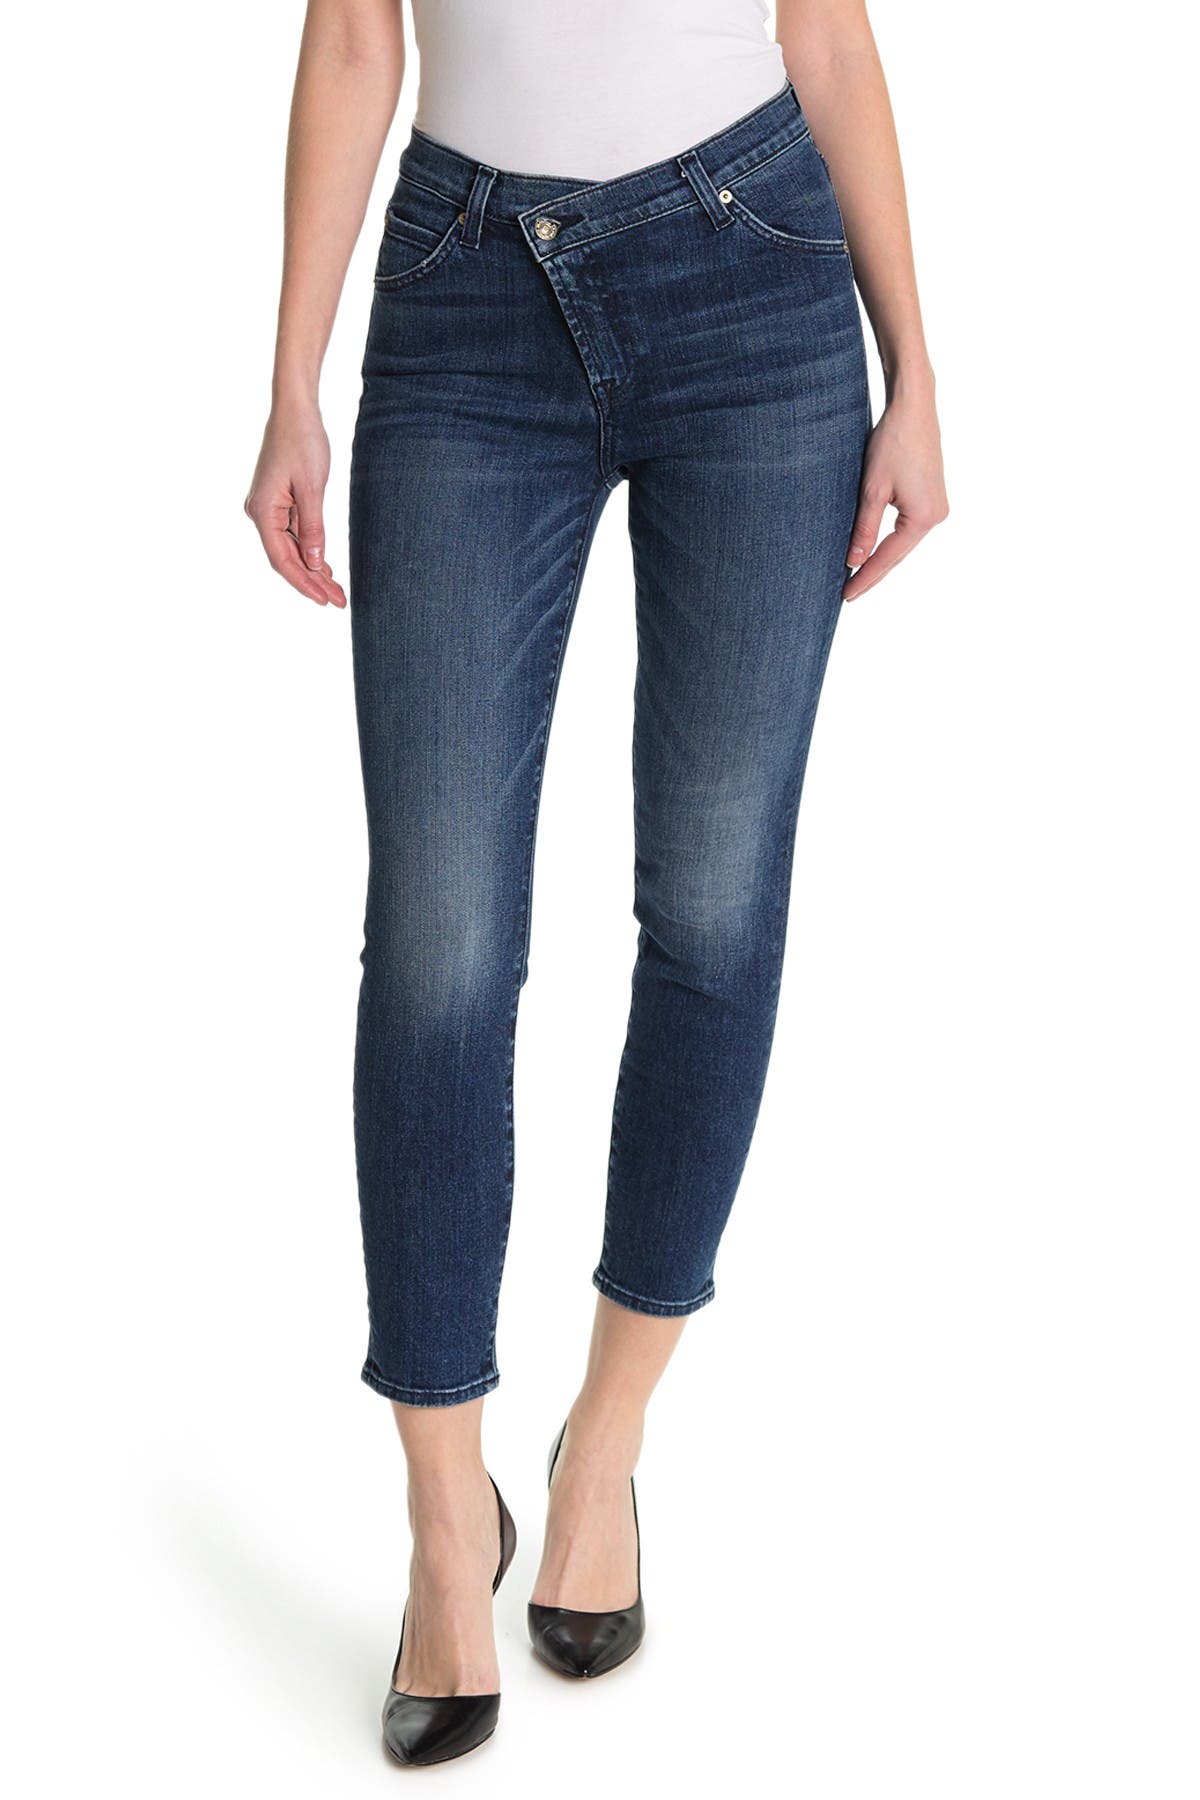 7 For All Mankind | Asymmetrical Ankle Cut Skinny Jeans | Nordstrom Rack